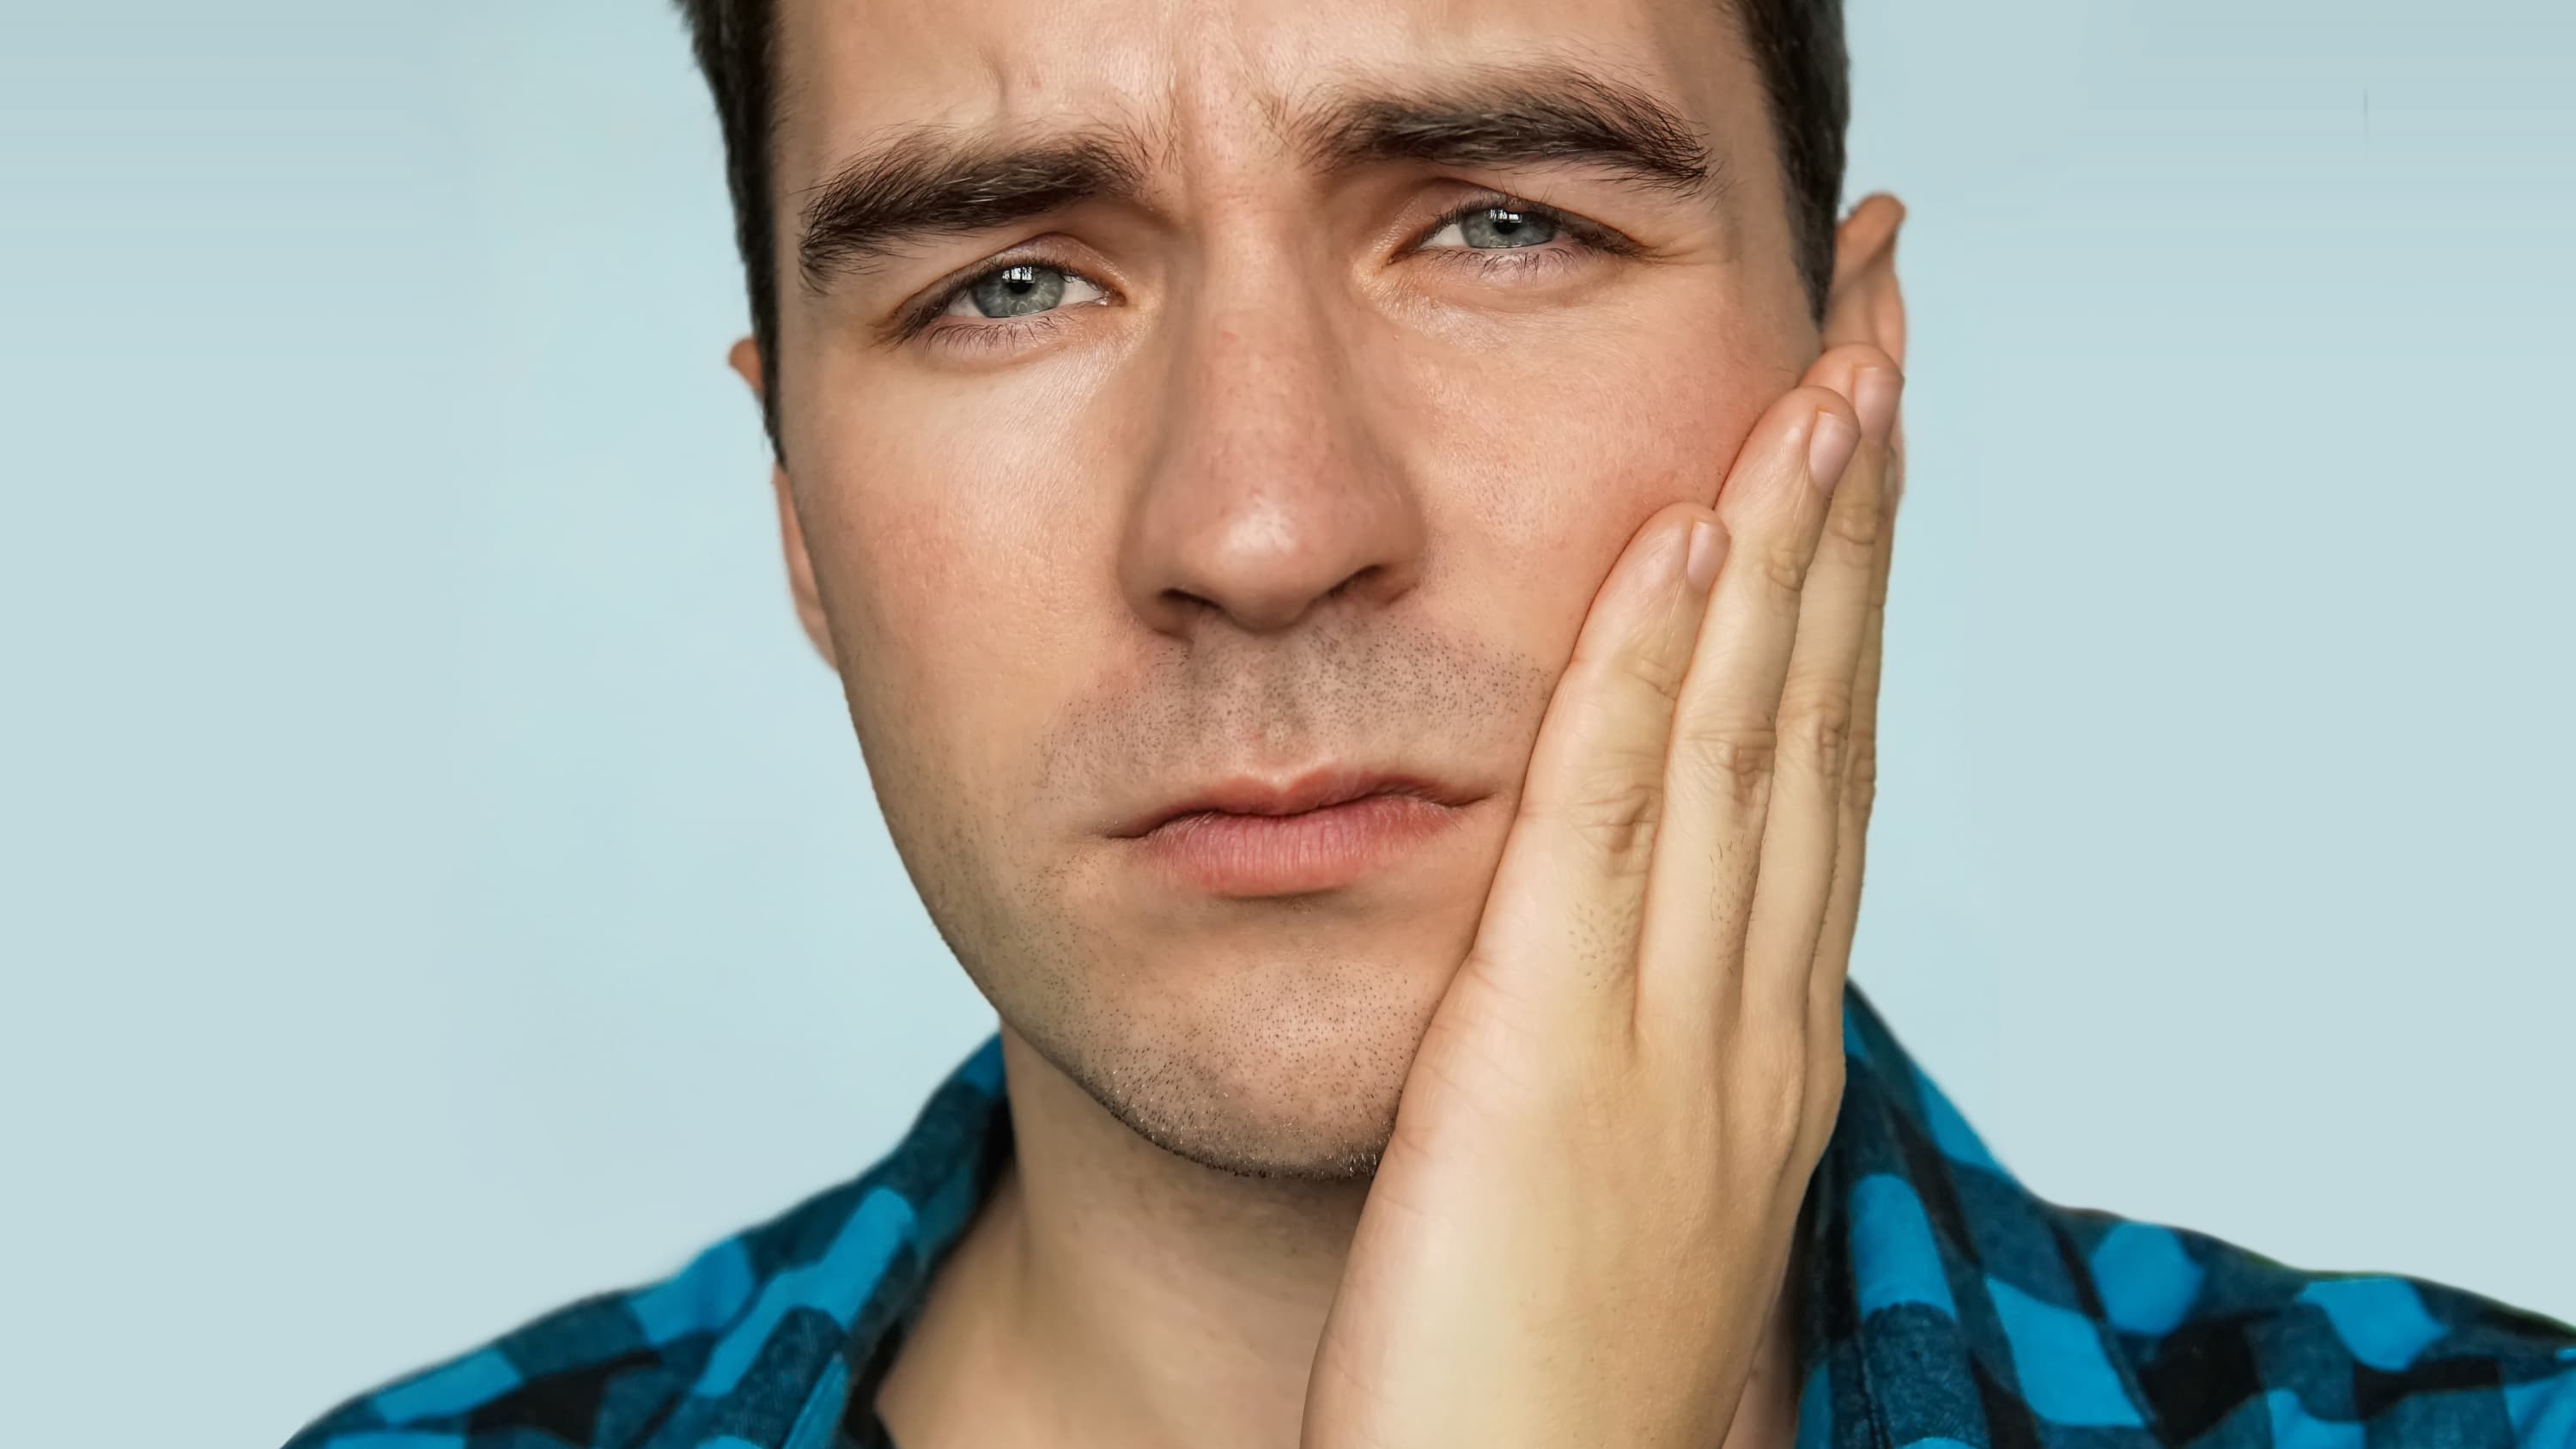 A man with trigeminal neuralgia touching his jaw who is in pain.